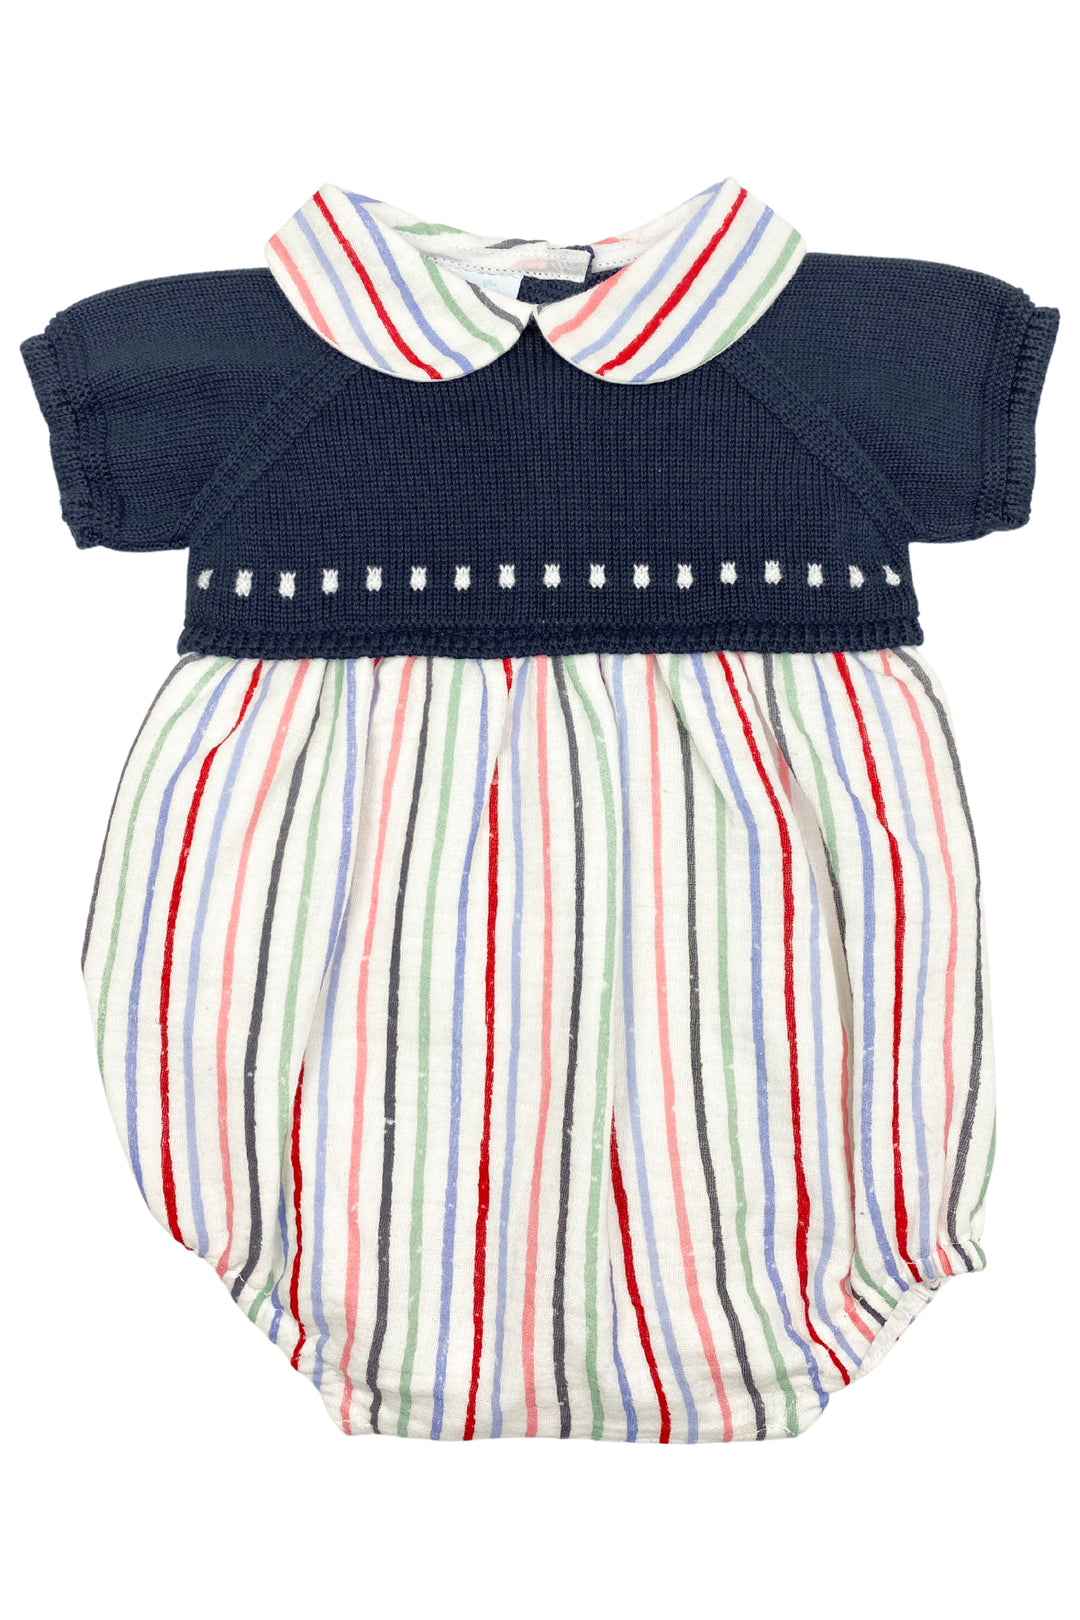 Granlei "Levi" Navy Half Knit Striped Romper | iphoneandroidapplications